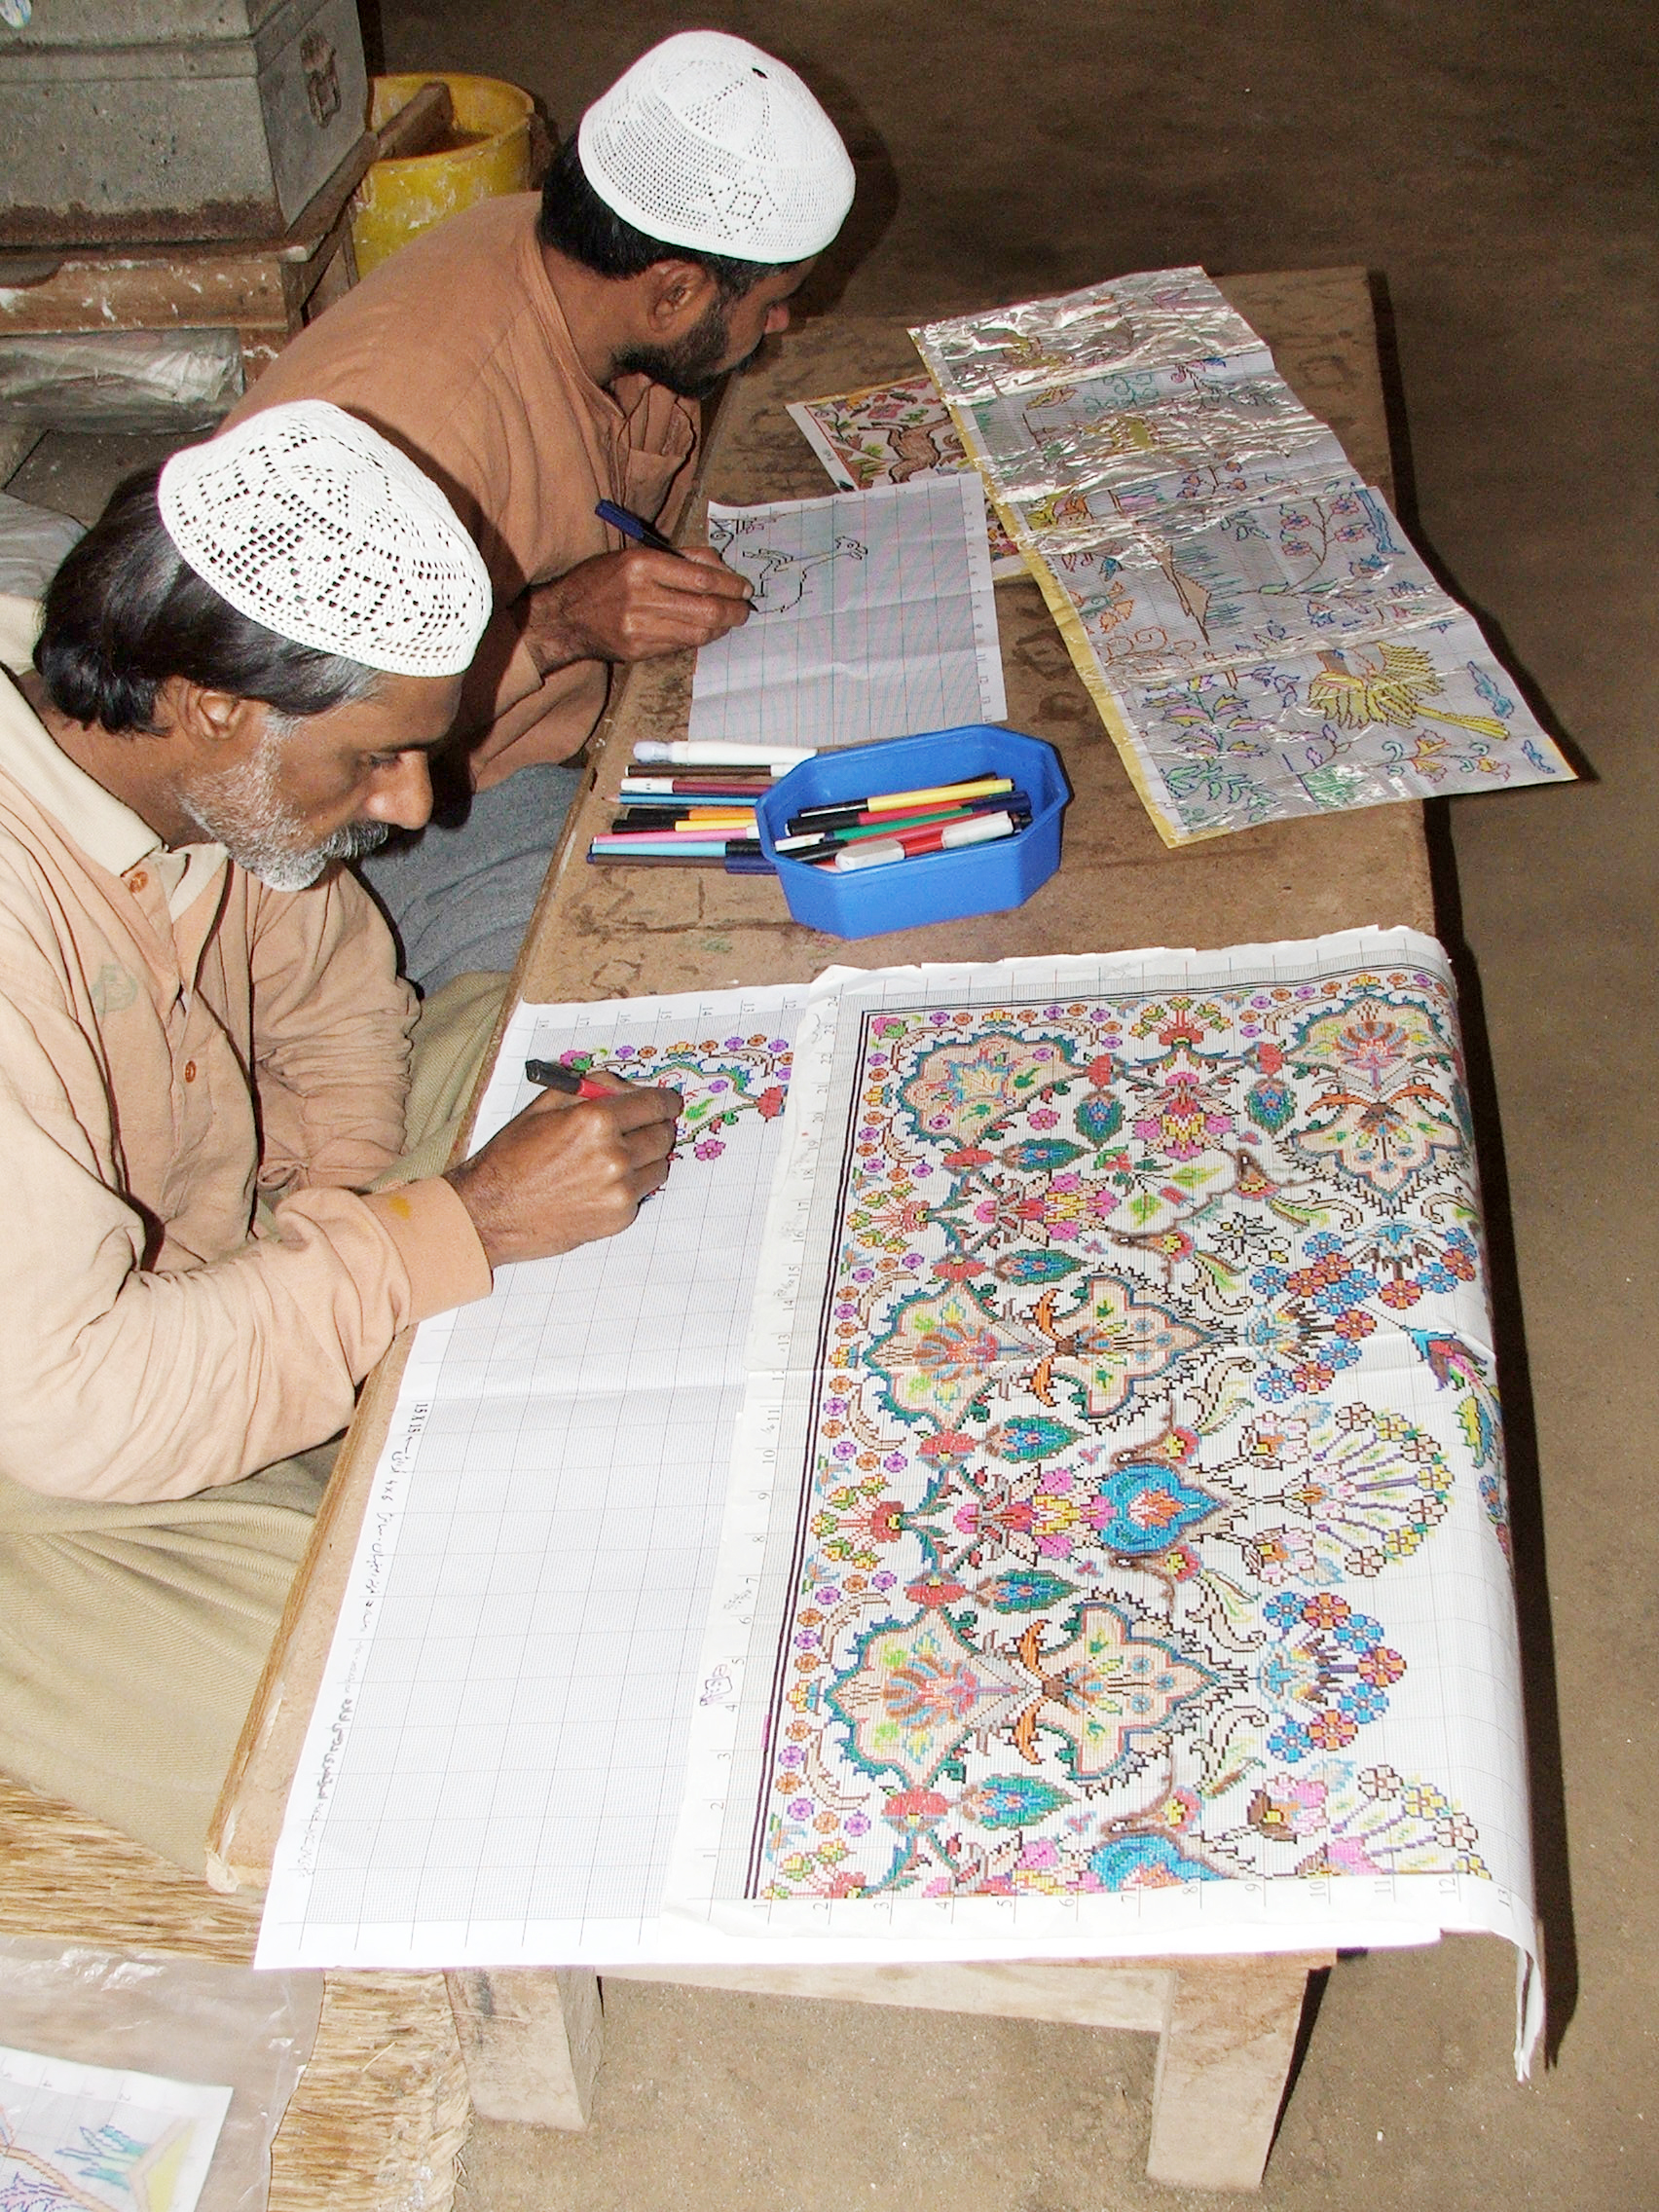 https://upload.wikimedia.org/wikipedia/commons/5/5d/Correctional_Activities_at_Central_Jail_Faisalabad%2C_Pakistan_in_2010_-_Convict_artists_busy_in_drawing_designs_of_carpets_on_graph_papers.JPG